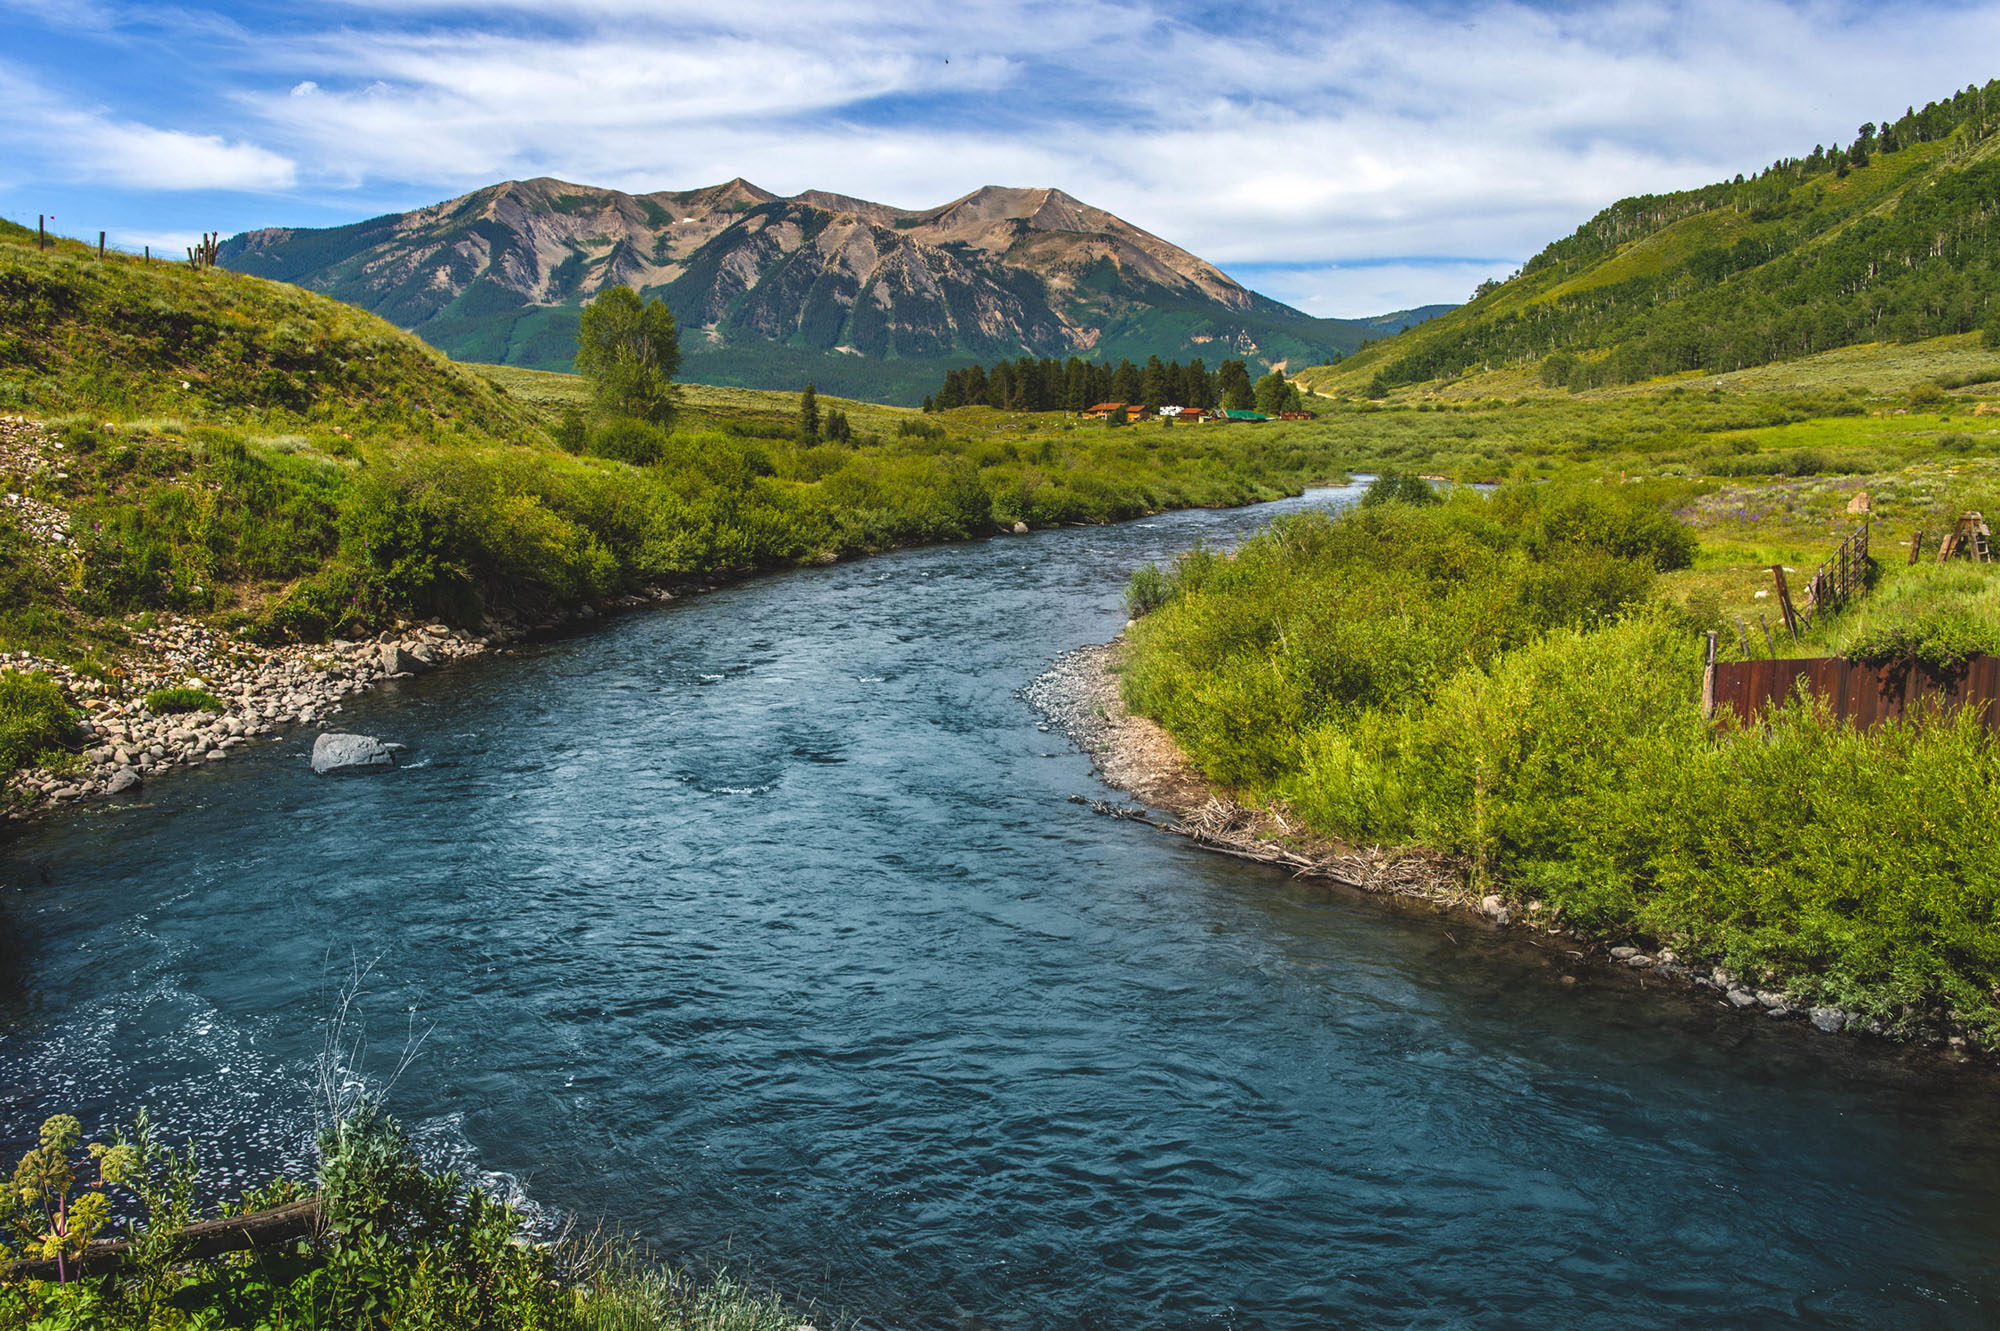 Green mountains and river in the East River catchment in Crested Butte Colorado.